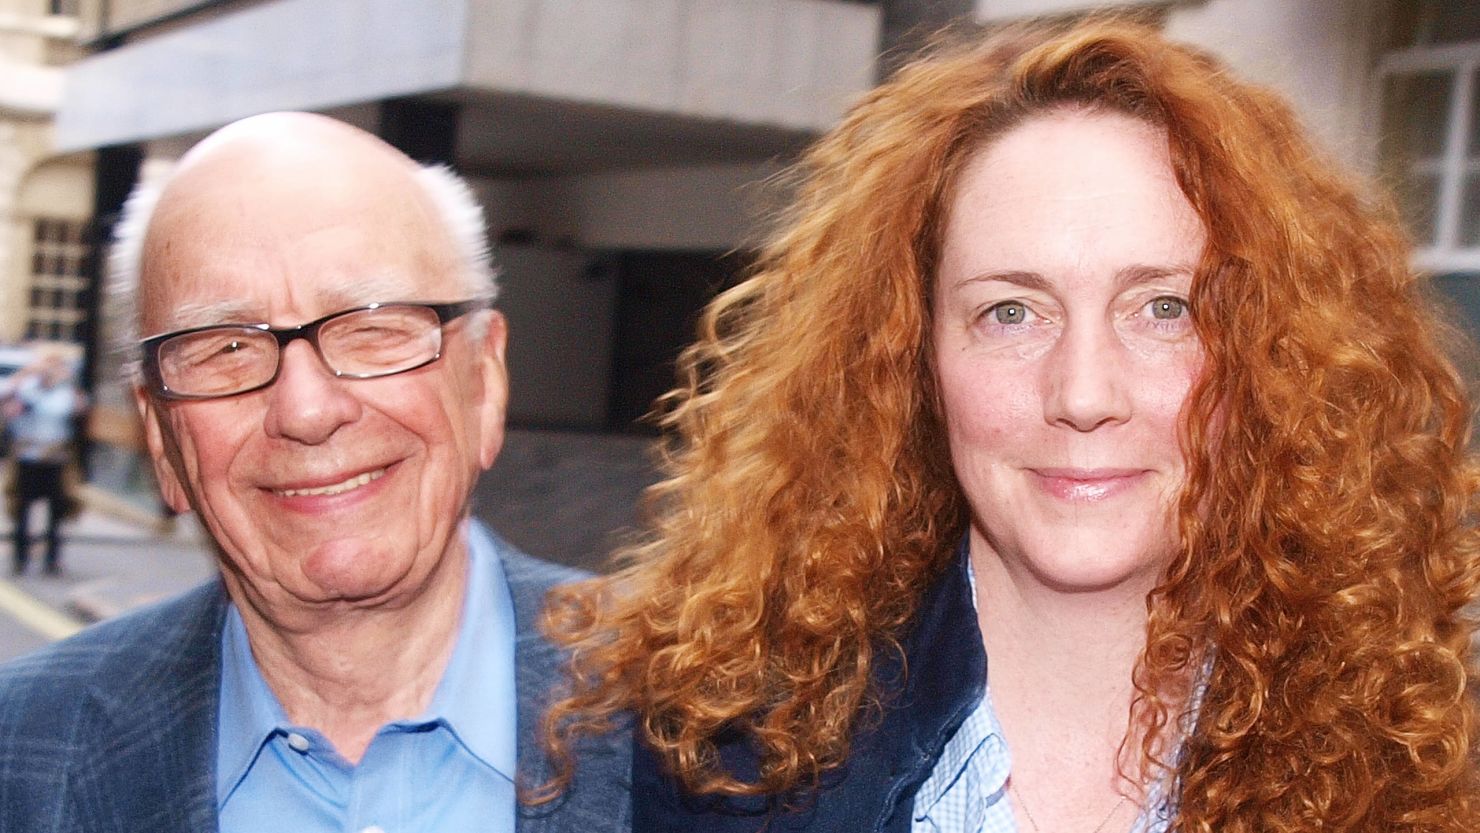 Ex-News of the World reporter Paul McMullan said Rebekah Brooks, seen here with Rupert Murdoch, knew of phone hacking.